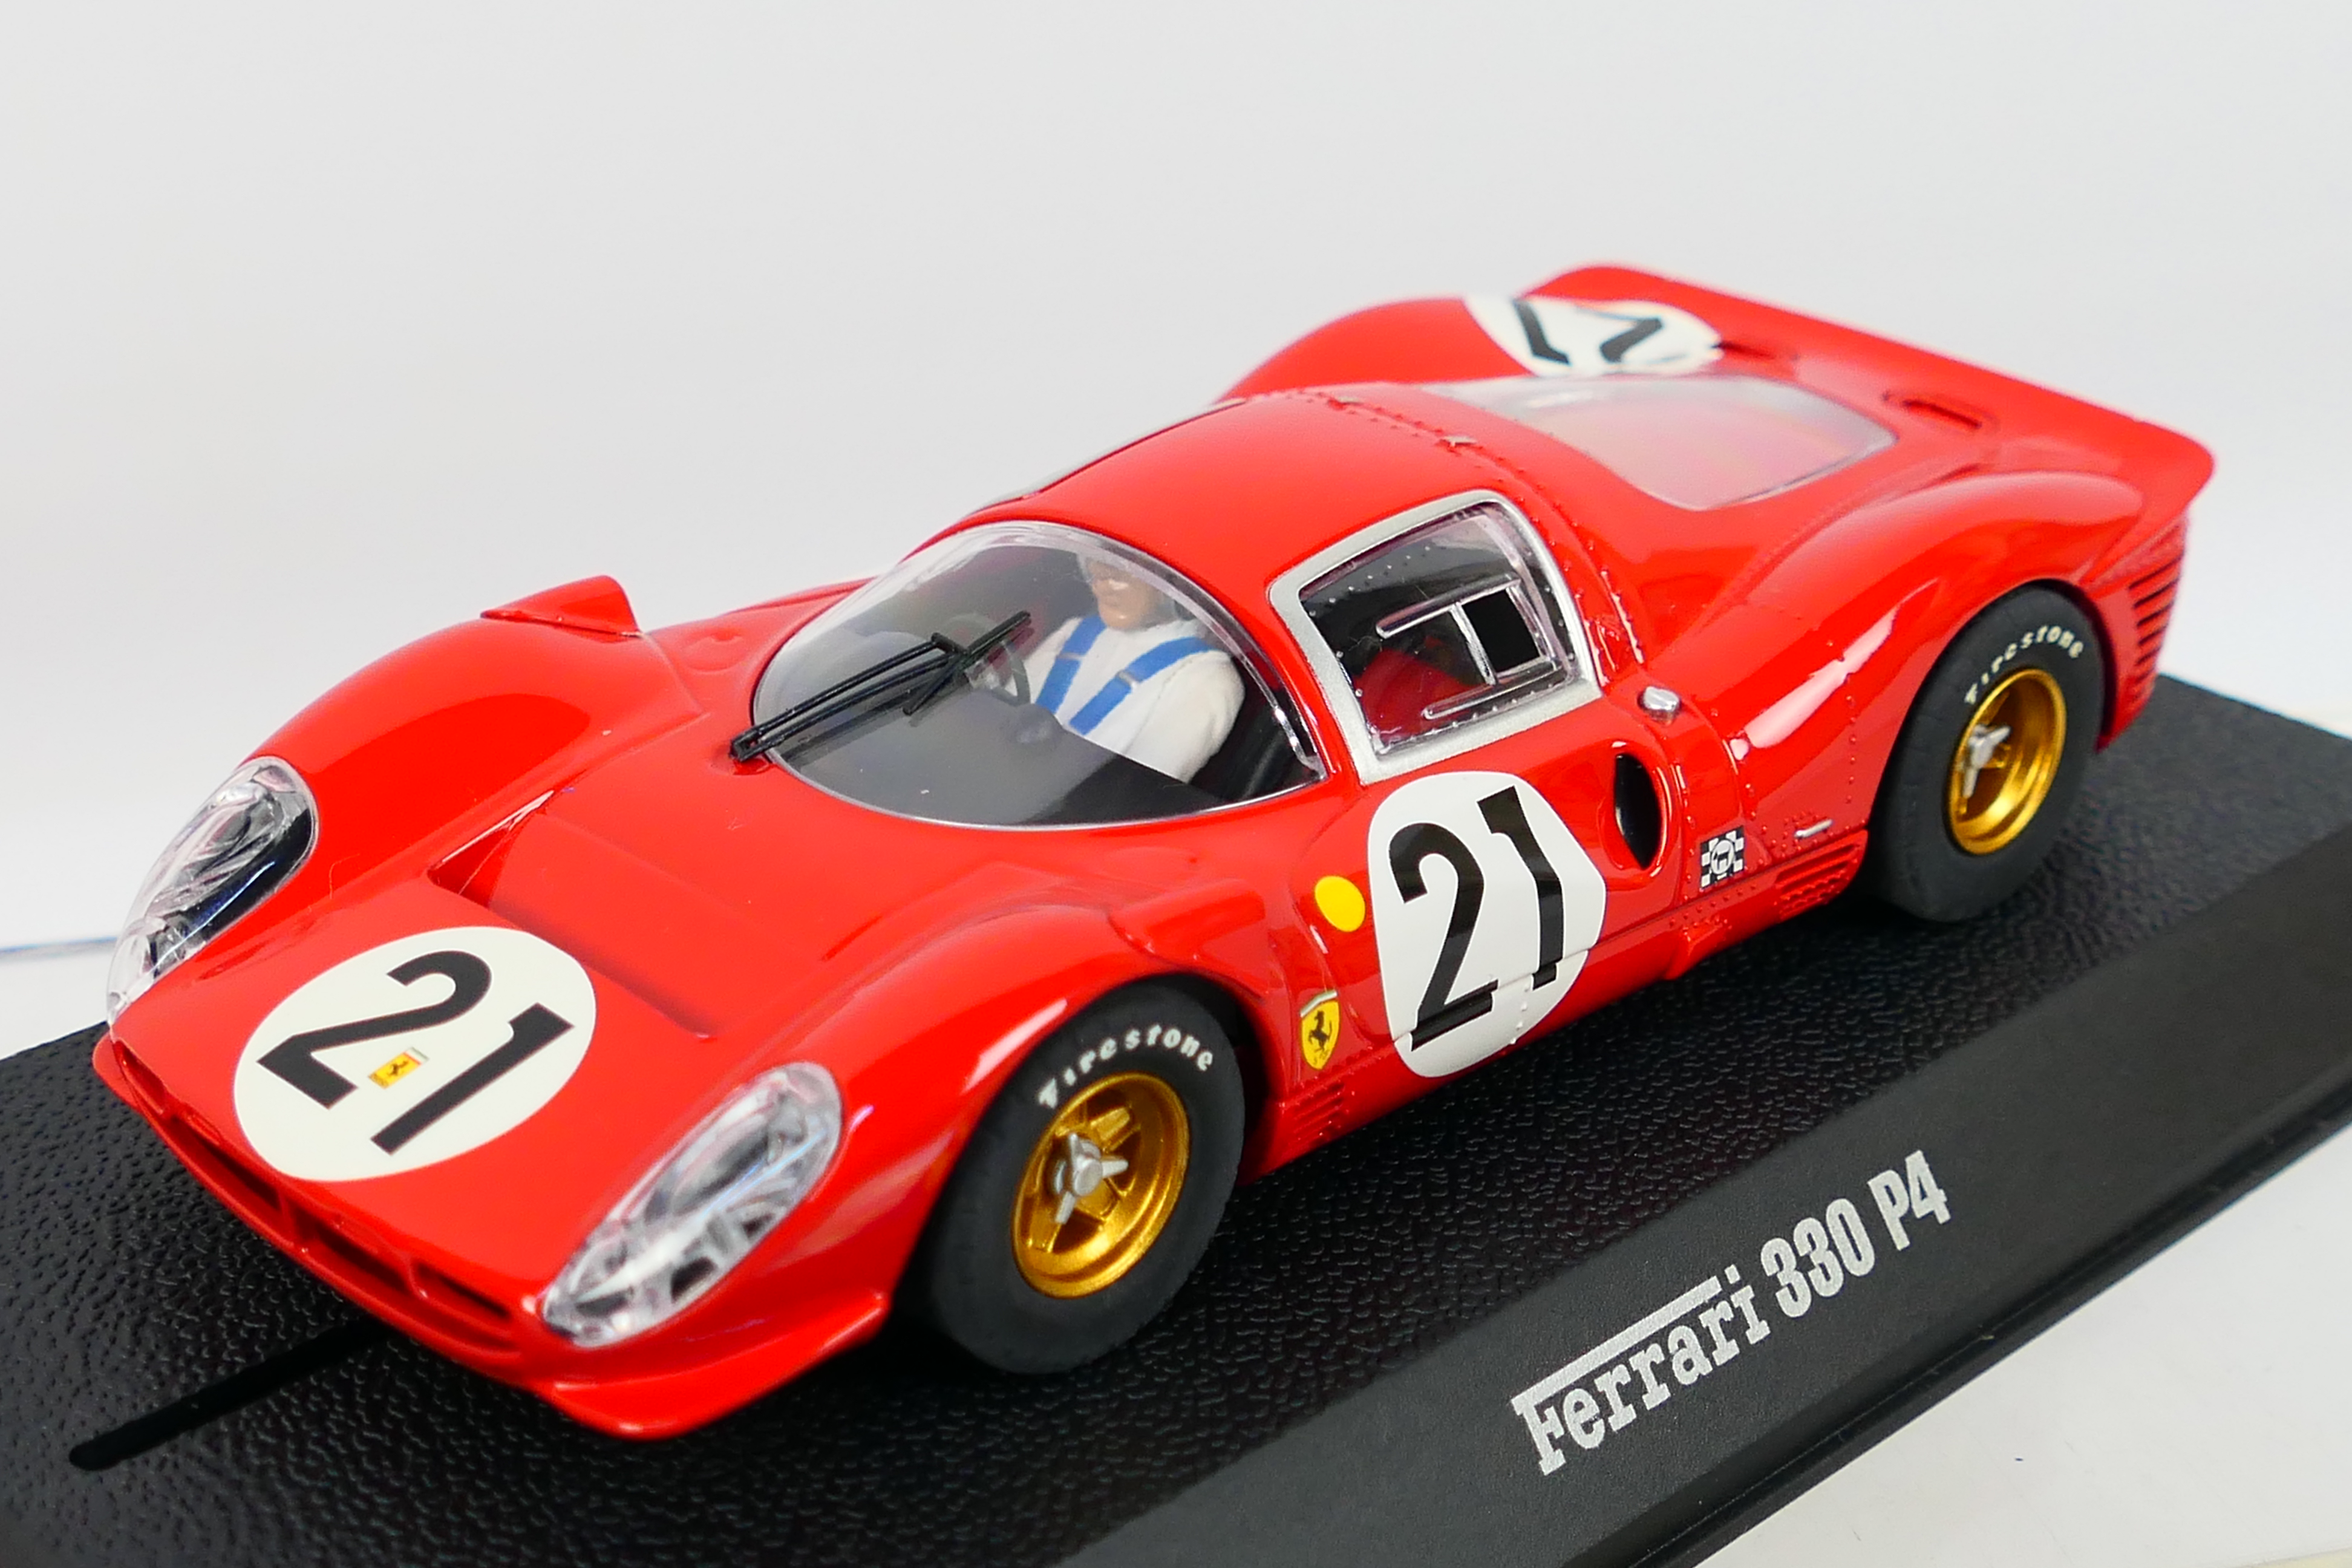 Scalextric - Two boxed Scalextric Ferrari 330 P4 slot cars. - Image 2 of 3